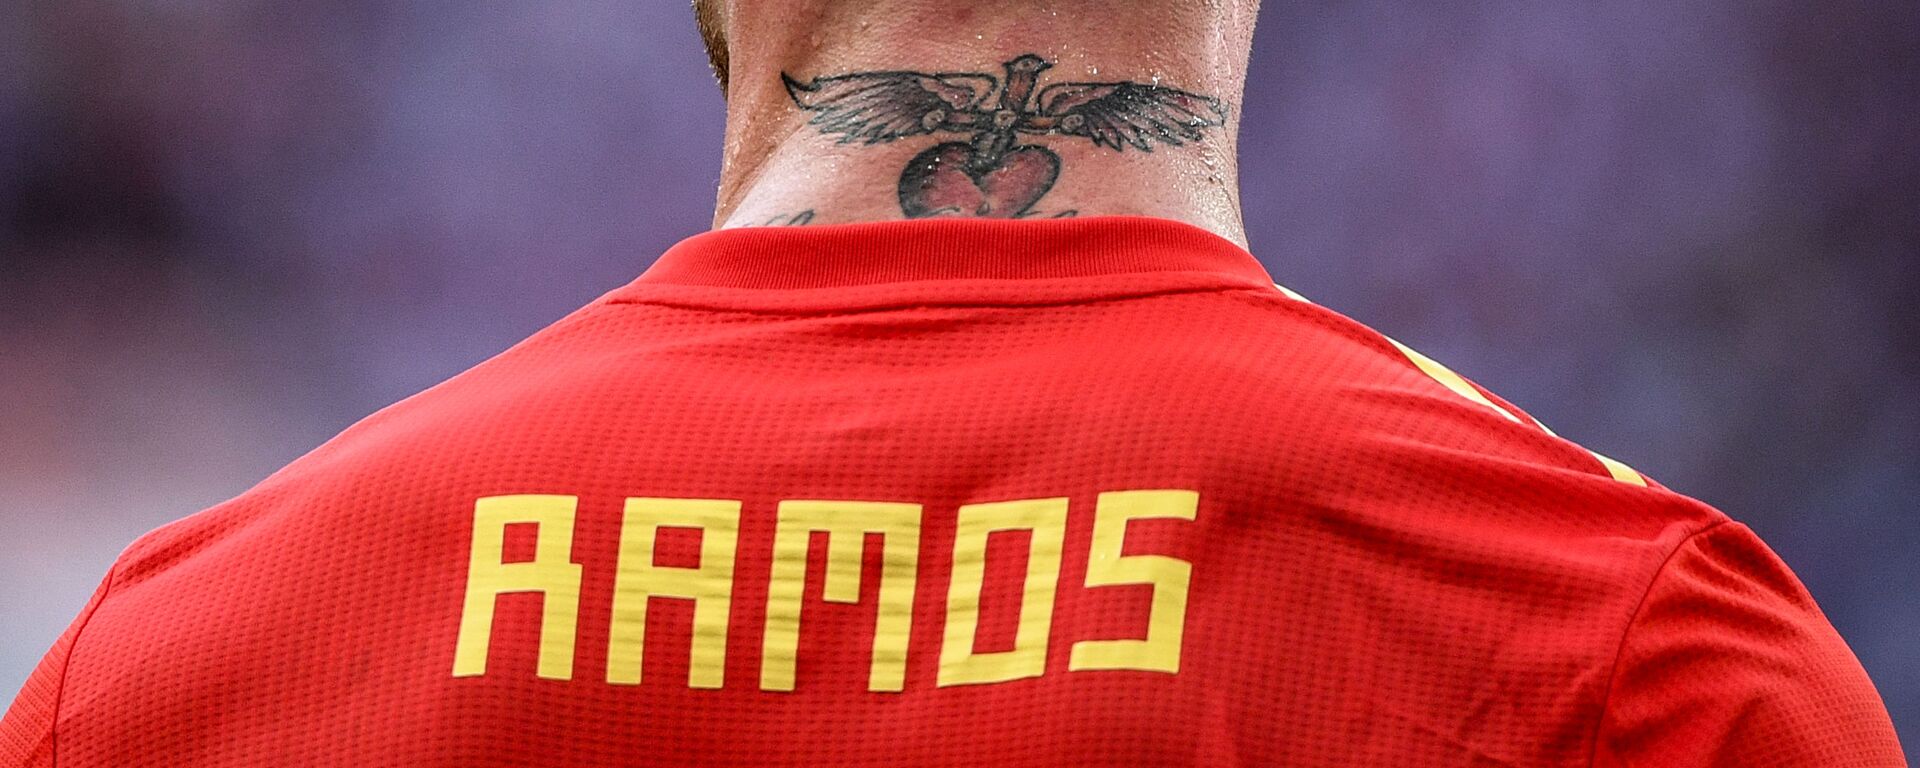 Spain's Sergio Ramos rests during the World Cup Round of 16 soccer match between Spain and Russia at the Luzhniki stadium in Moscow, Russia, July 1, 2018. - Sputnik International, 1920, 24.05.2021